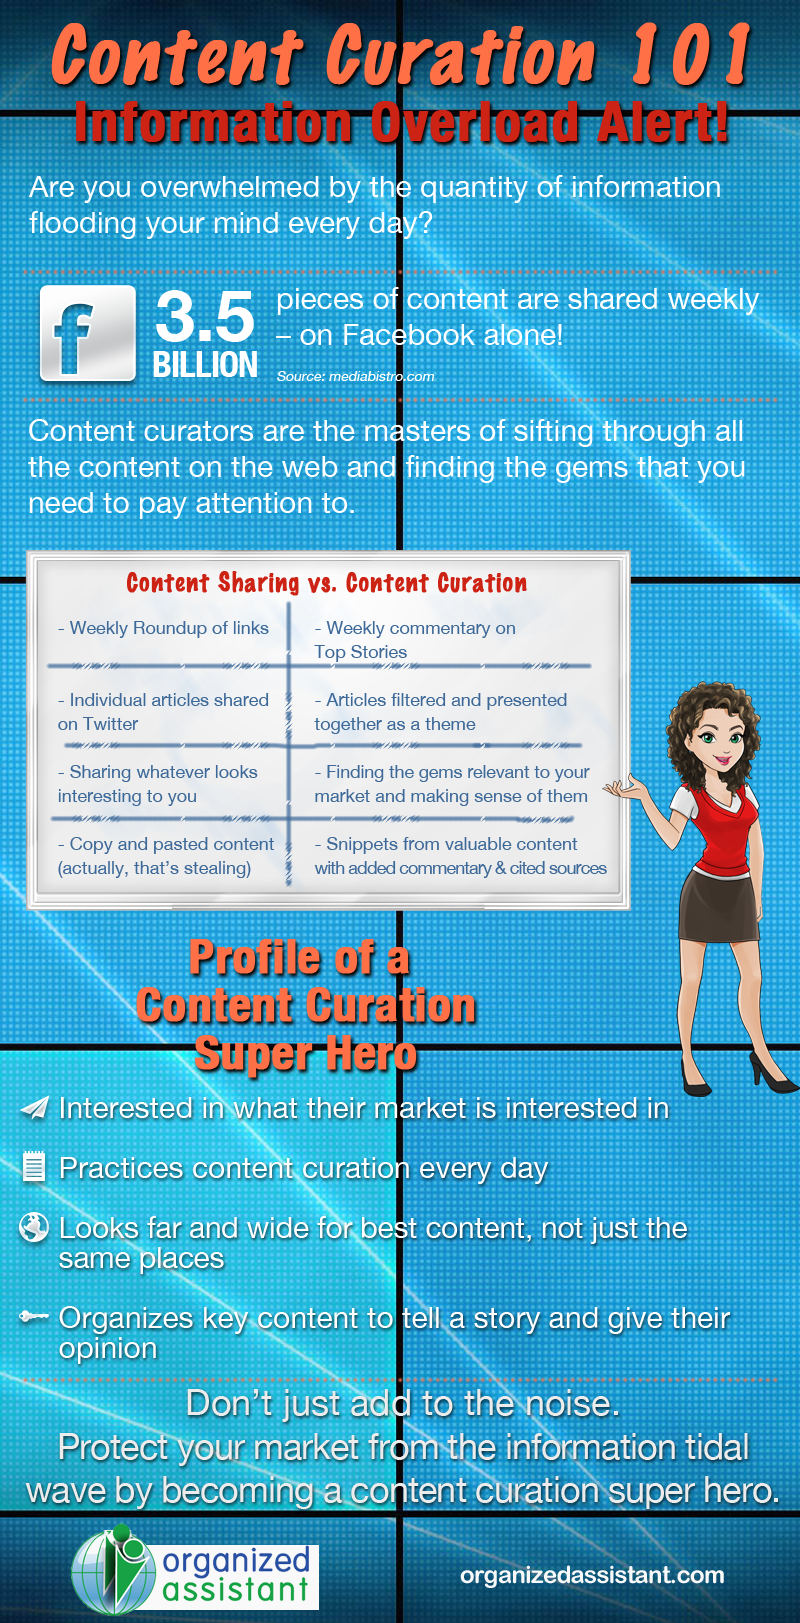 Content Curation 101